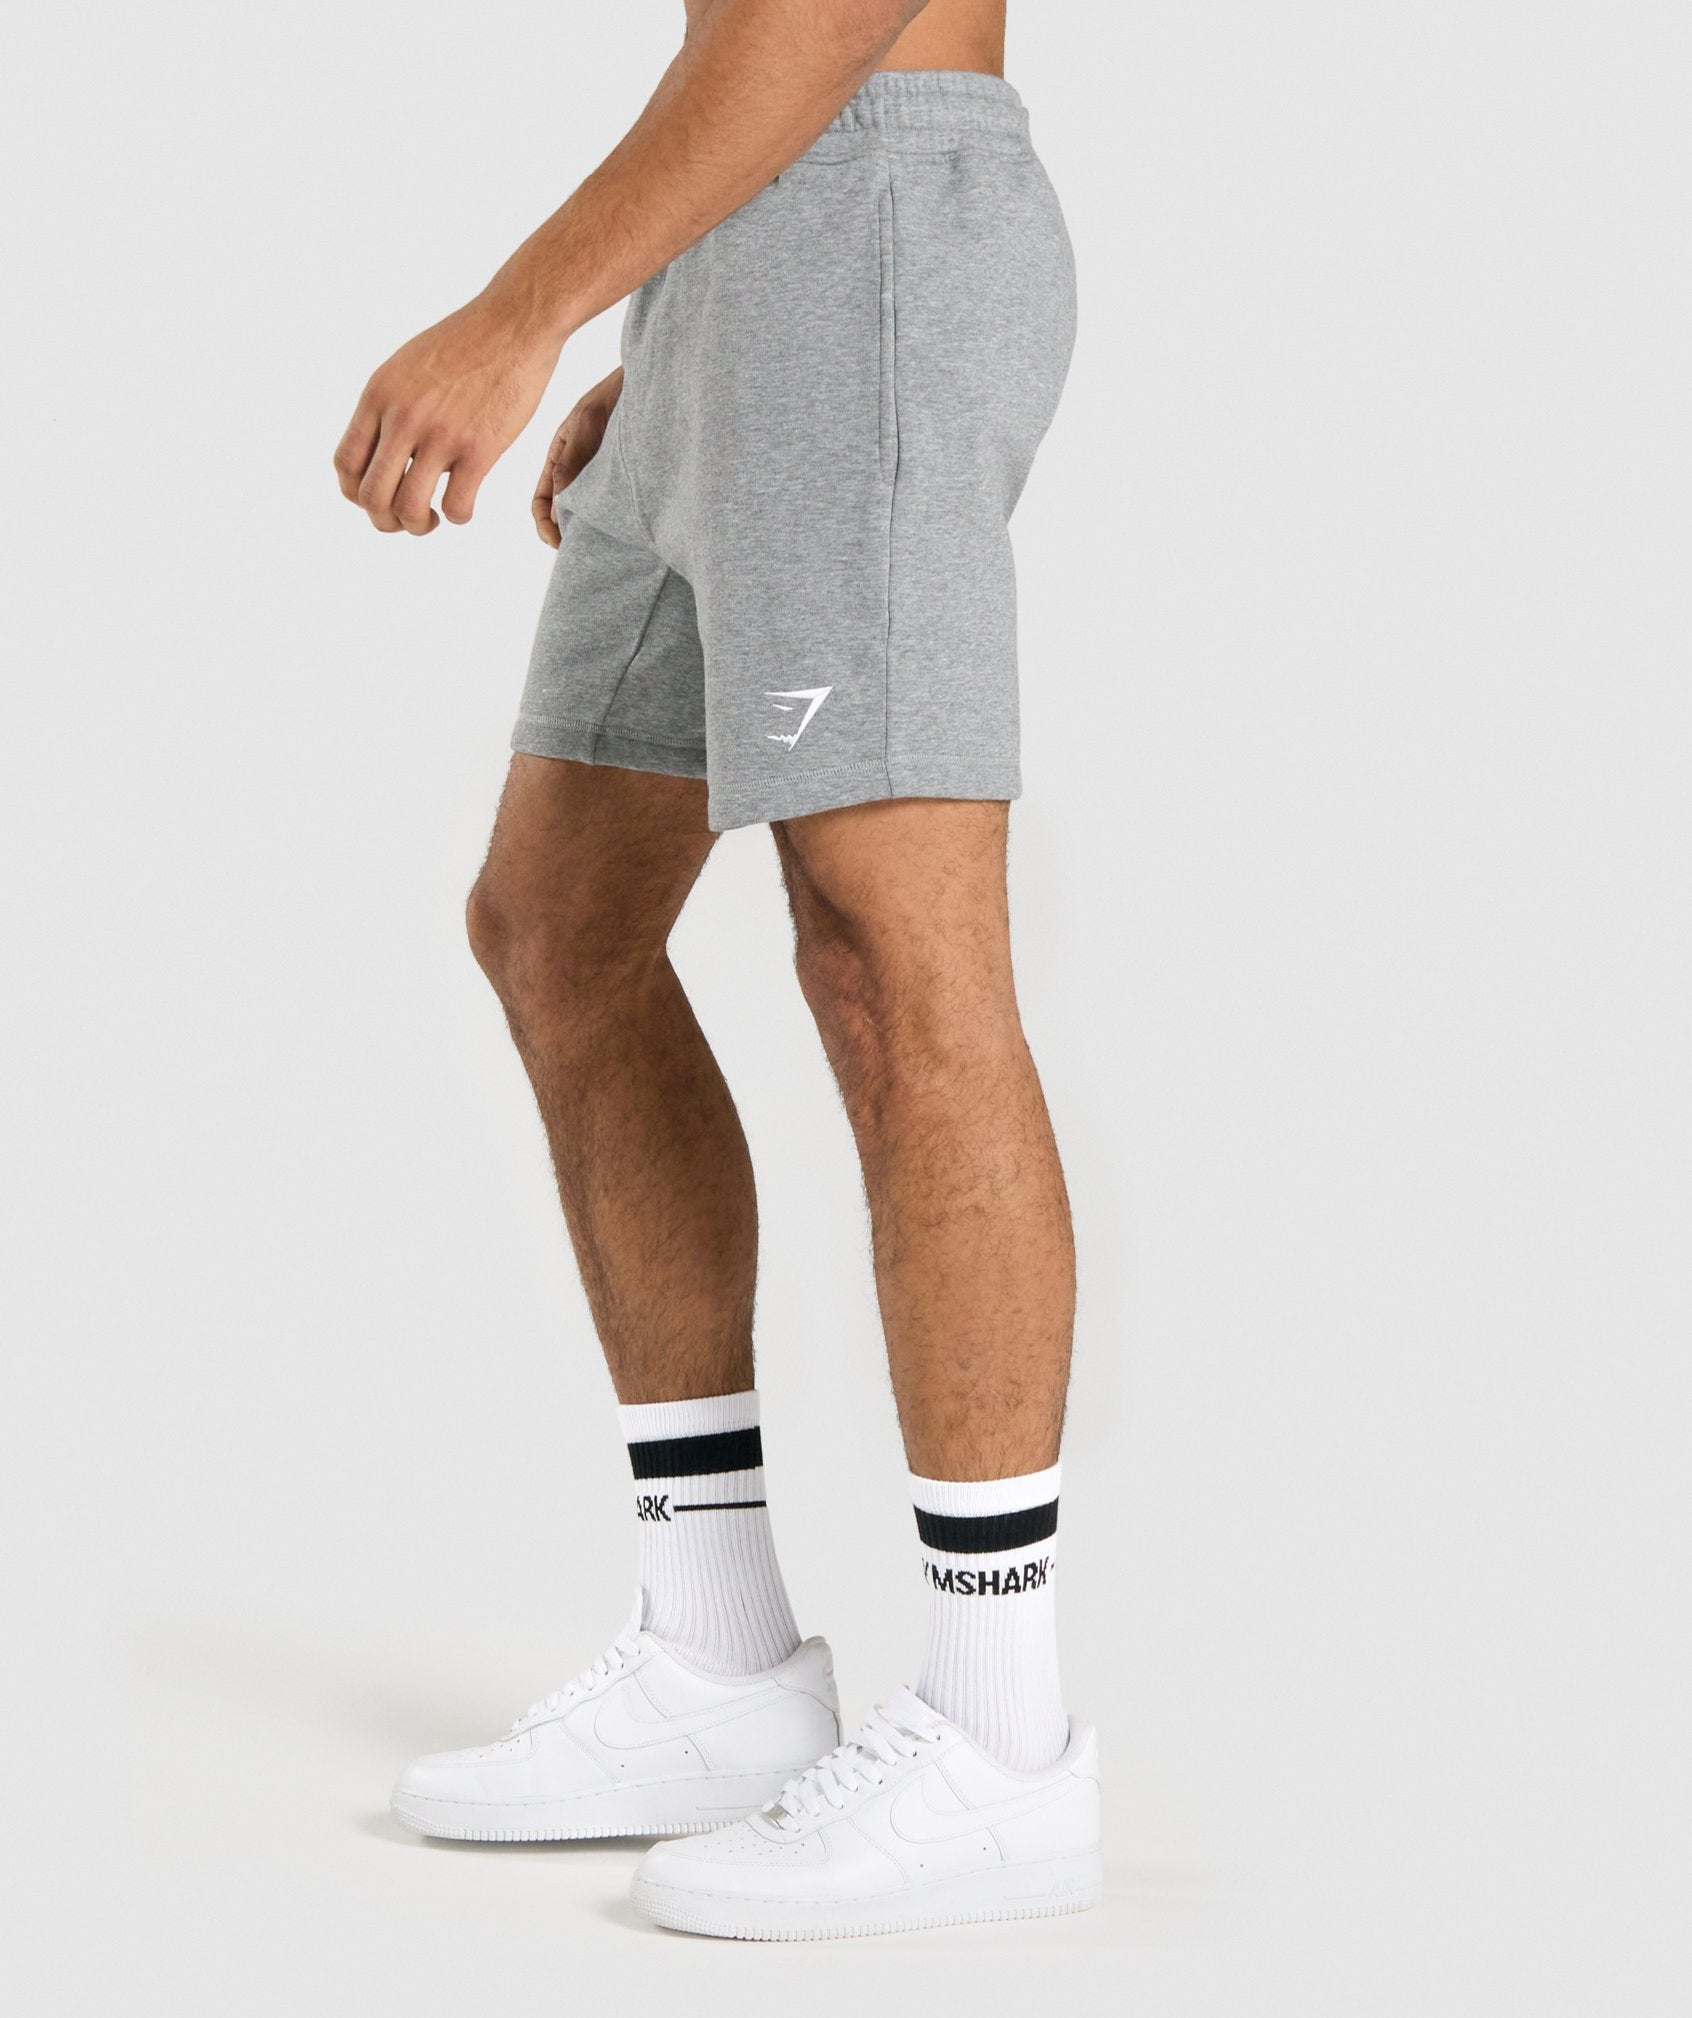 Crest Shorts in Charcoal Marl